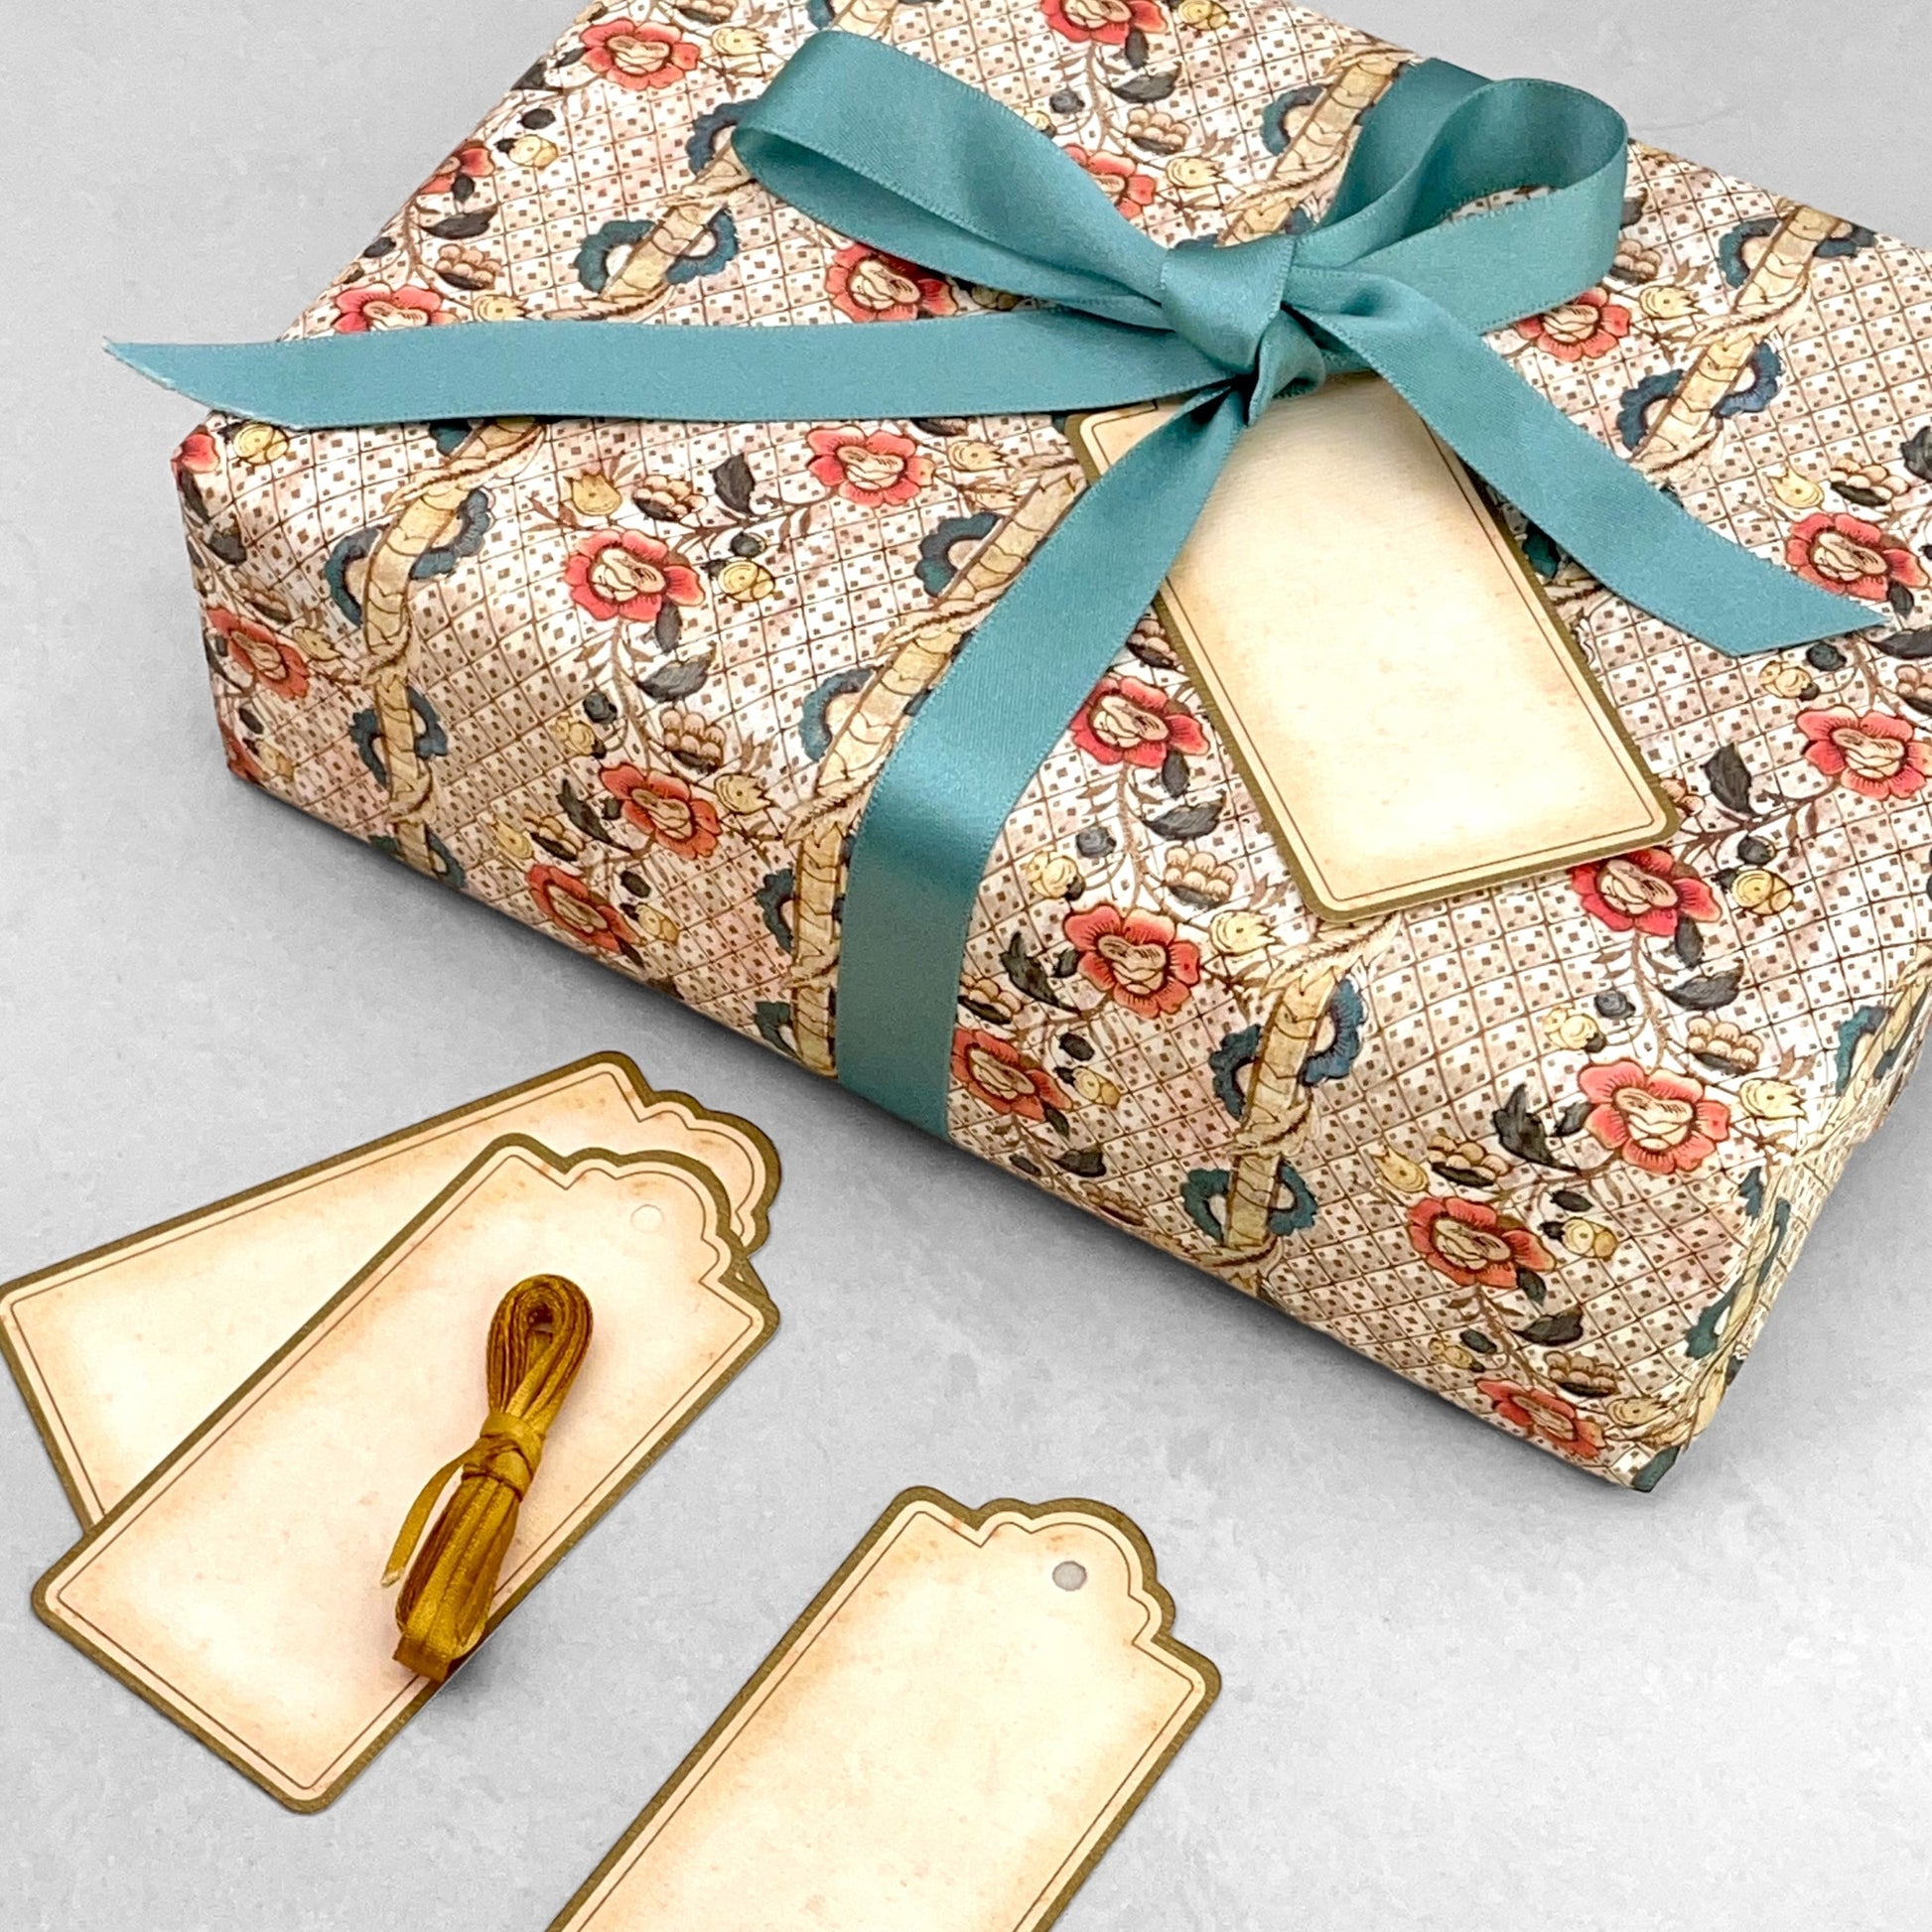 set of 4 vintage style gift tags by Grafiche Tassotti. Rectangular with sepia colour paper and gold border. Presented with gold ribbon.  Pictured with a present wrapped in an Italian patterned paper by Remondini